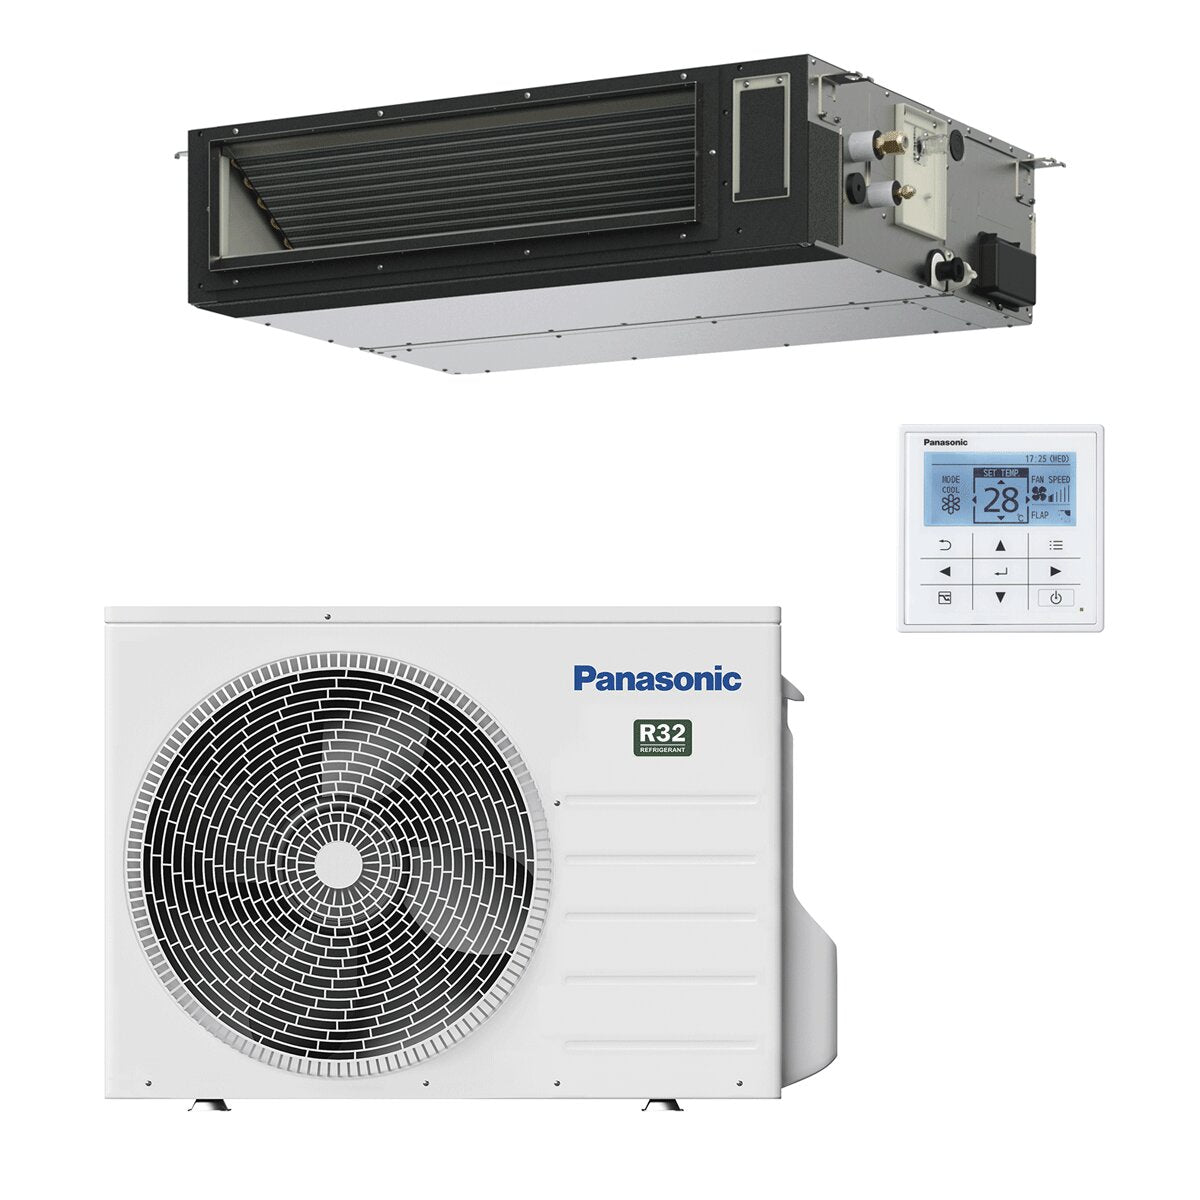 Panasonic Ducted Air Conditioner PACi NX Standard 18000 BTU R32 Inverter A++/A+